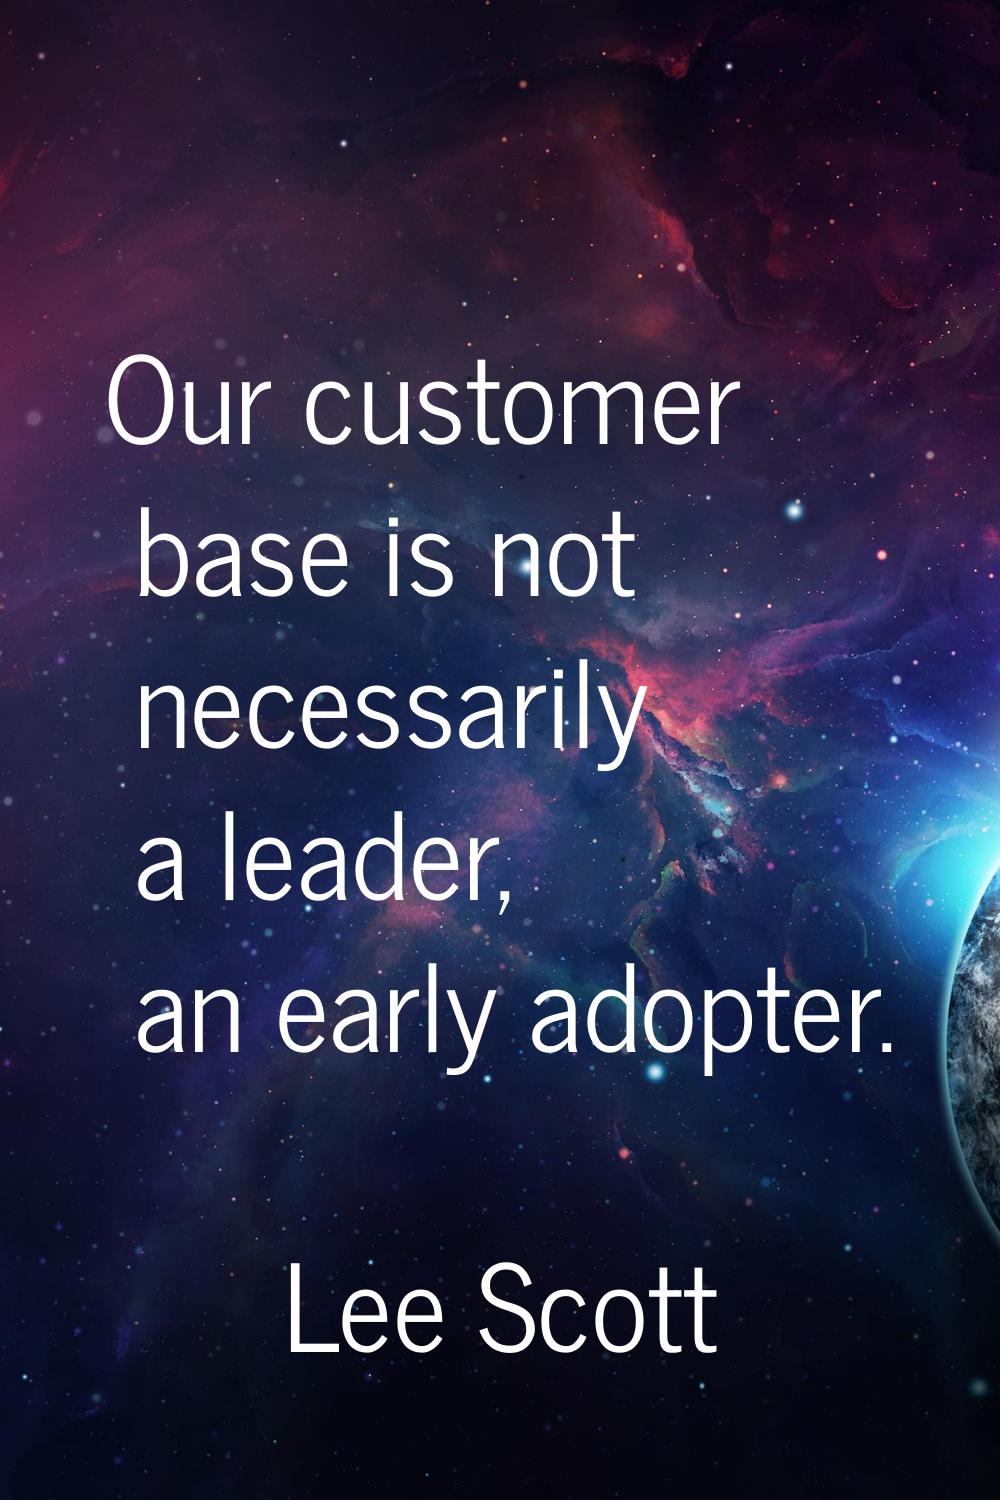 Our customer base is not necessarily a leader, an early adopter.